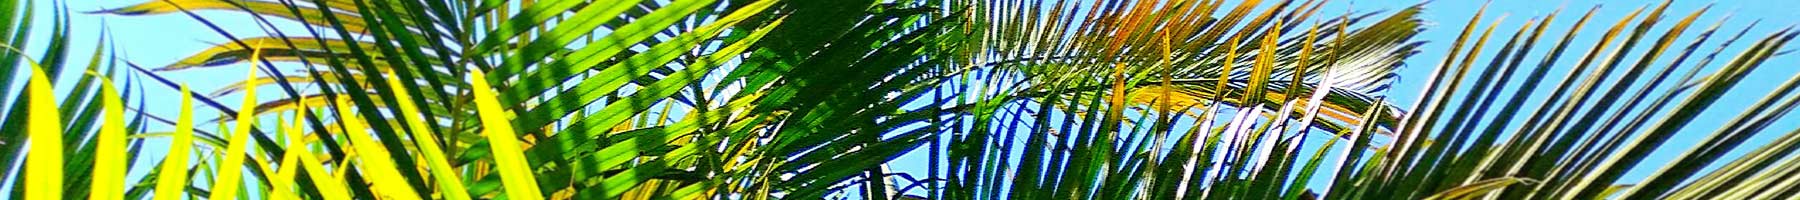 Palm fronds against the sky